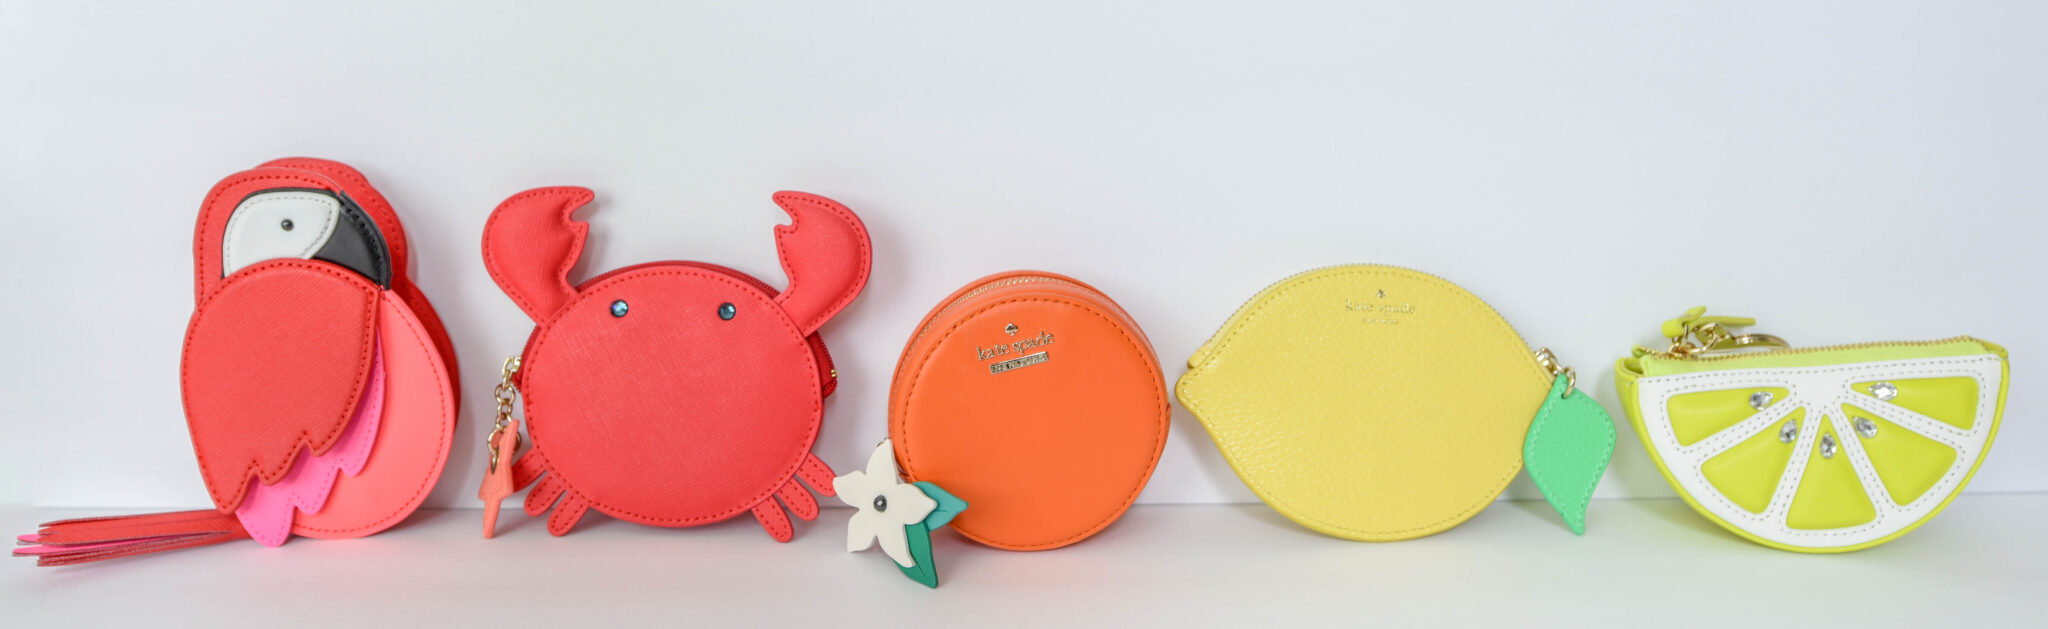 Fashion Product Photography Kate Spade Coin Purses